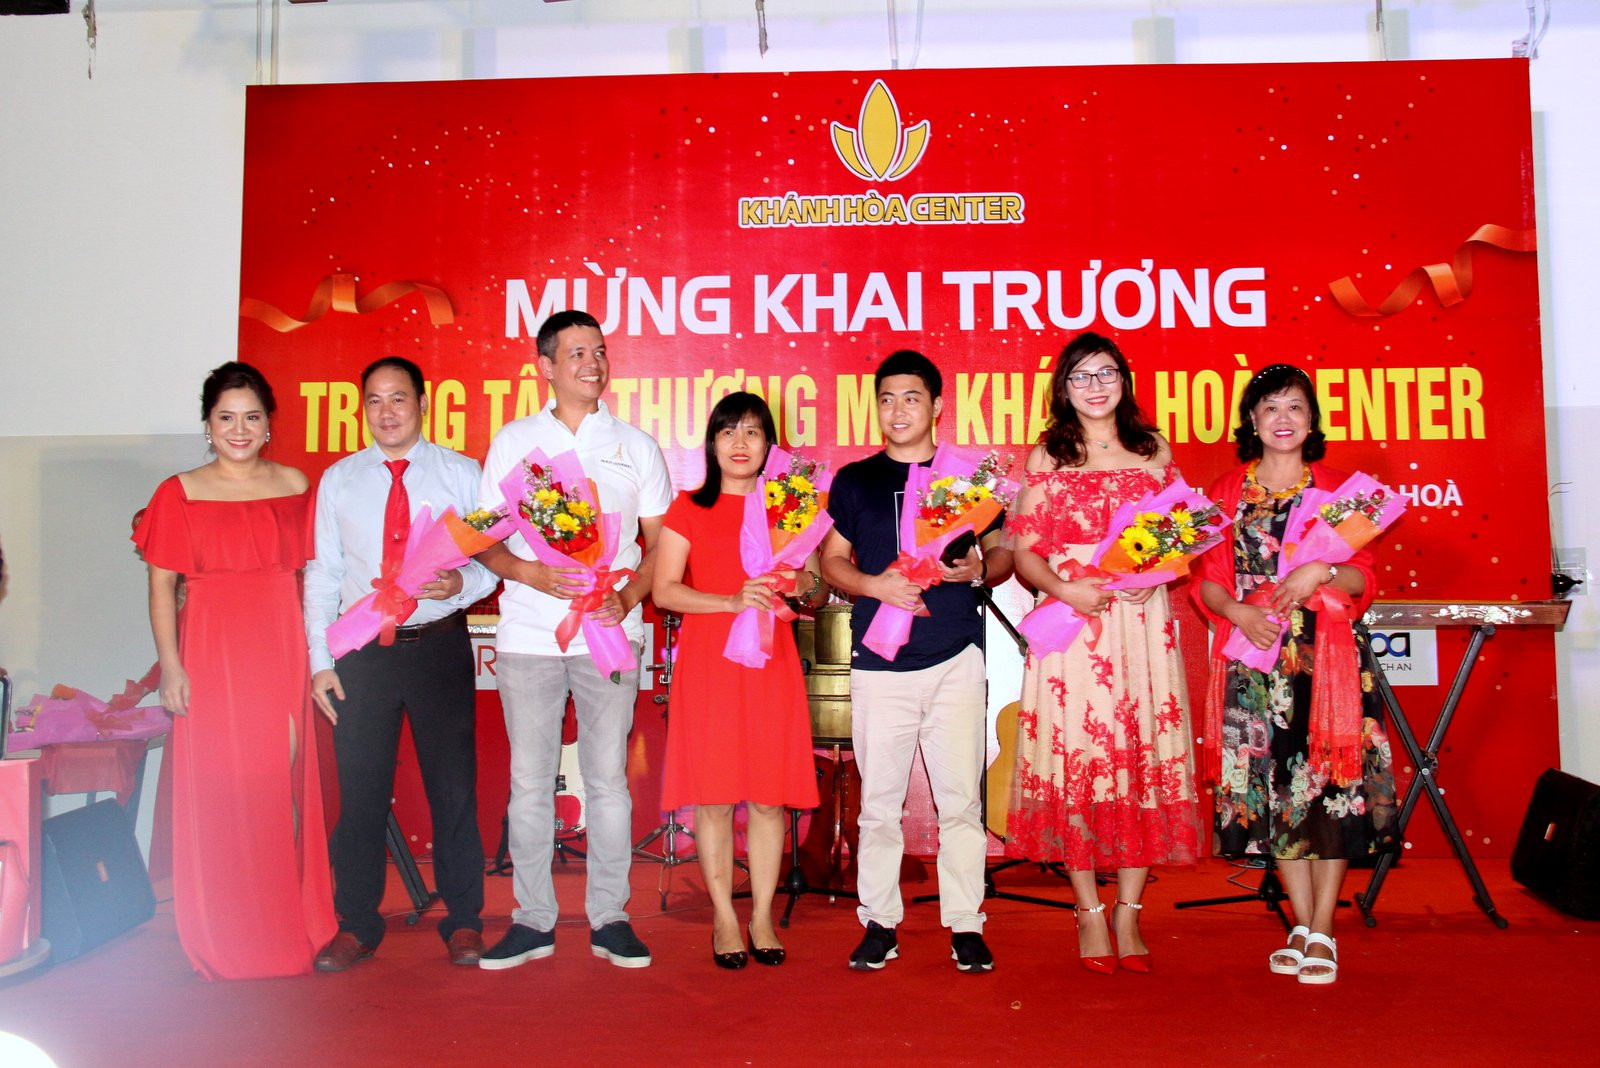 Representative Hoang Kim Co., Ltd. offers flowers to partners